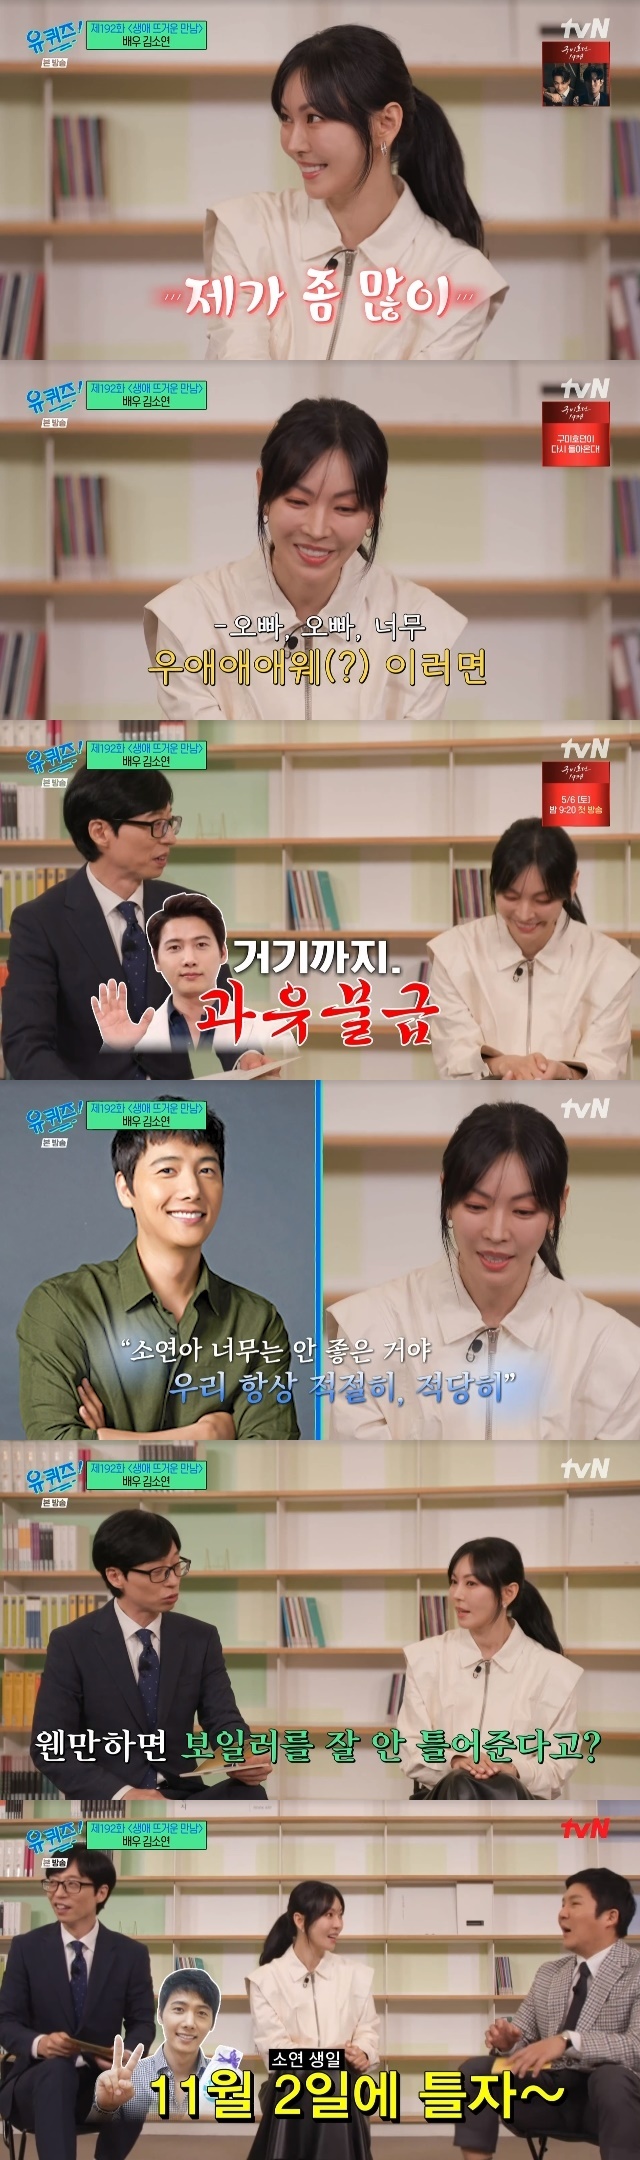 Actress Kim So-yeon shares love affair with husband Lee Sang-wooActor Kim So-yeon appeared as a guest in the 192th episode of tvN entertainment show You Quiz on the Block (hereinafter referred to as You Quiz on the Block), which aired on May 3.Kim So-yeon asked her husband Lee Sang-woo if she had not talked about it today. Im shaking too much, but Im going to go with my brother. Kim So-yeon Fighting You Quiz on the Block Fighting!Yoo Jae-suk said that Lee Sang-woos unique foreign language method is sang woo and So-yeon sang woo Tikitaka is a fantasy.Kim So-yeon said, Thank you. My brother is really ridiculous, funny, witty and really funny. Yoo Jae-suk responded positively, This is the first time you have said this.When I say this, I say You are a cyber lover and You are my own love.In the past, Kim So-yeon had a date with Lee Sang-woo from dawn and gathered topics with an anecdote that he ate three meals together. When asked about the current situation, (Lee Sang-woo) has become a morning person beyond morning person these days.He always wakes me up at 5:30 a.m. He said, Get up, lets have breakfast, so I eat around 7:00 a.m.When Kim So-yeon was asked if she would wake up, she said, At first, I couldnt get up at all, so my brother would carry me to the table, carry me to the sofa. When I open my eyes, Im on the sofa or at the table.Kim So-yeon asked if he had not said that he wanted to sleep more. He replied, Its good for me to be together and my brother is good.Kim So-yeon said, I still have a lot of affection for the couple, he said. If you say What are you doing? (Lee Sang-woo) says There is too much money. I always say I should not like it too much.So-yeon, its too bad. Were always right. That way we can last longer and be happy for life, he said.Kim So-yeon said, I wake up at dawn, said Yoo Jae-suk, who wondered, If you listen to it, lets keep it calm.Kim So-yeon also said that Lee Sang-woo is a style that raises himself strongly, and he does not play Boiler well.Kim So-yeon said, I have a mindset that sang woo brother should keep the room temperature at an appropriate temperature so that he does not feel sad in the outside cold.On the day of Boiler, I get so cold that I want to play it from September to October. My brother can not do it. My birthday is November 2, and I will play it on that day. Actually, I stood on my birthday last year and turned it on as soon as I opened my eyes.The good thing about it is that when I get older, my birthday becomes meaningless, and I do not know how long Ive been waiting for my birthday. There is such a good thing (I wanted to), he recalled.